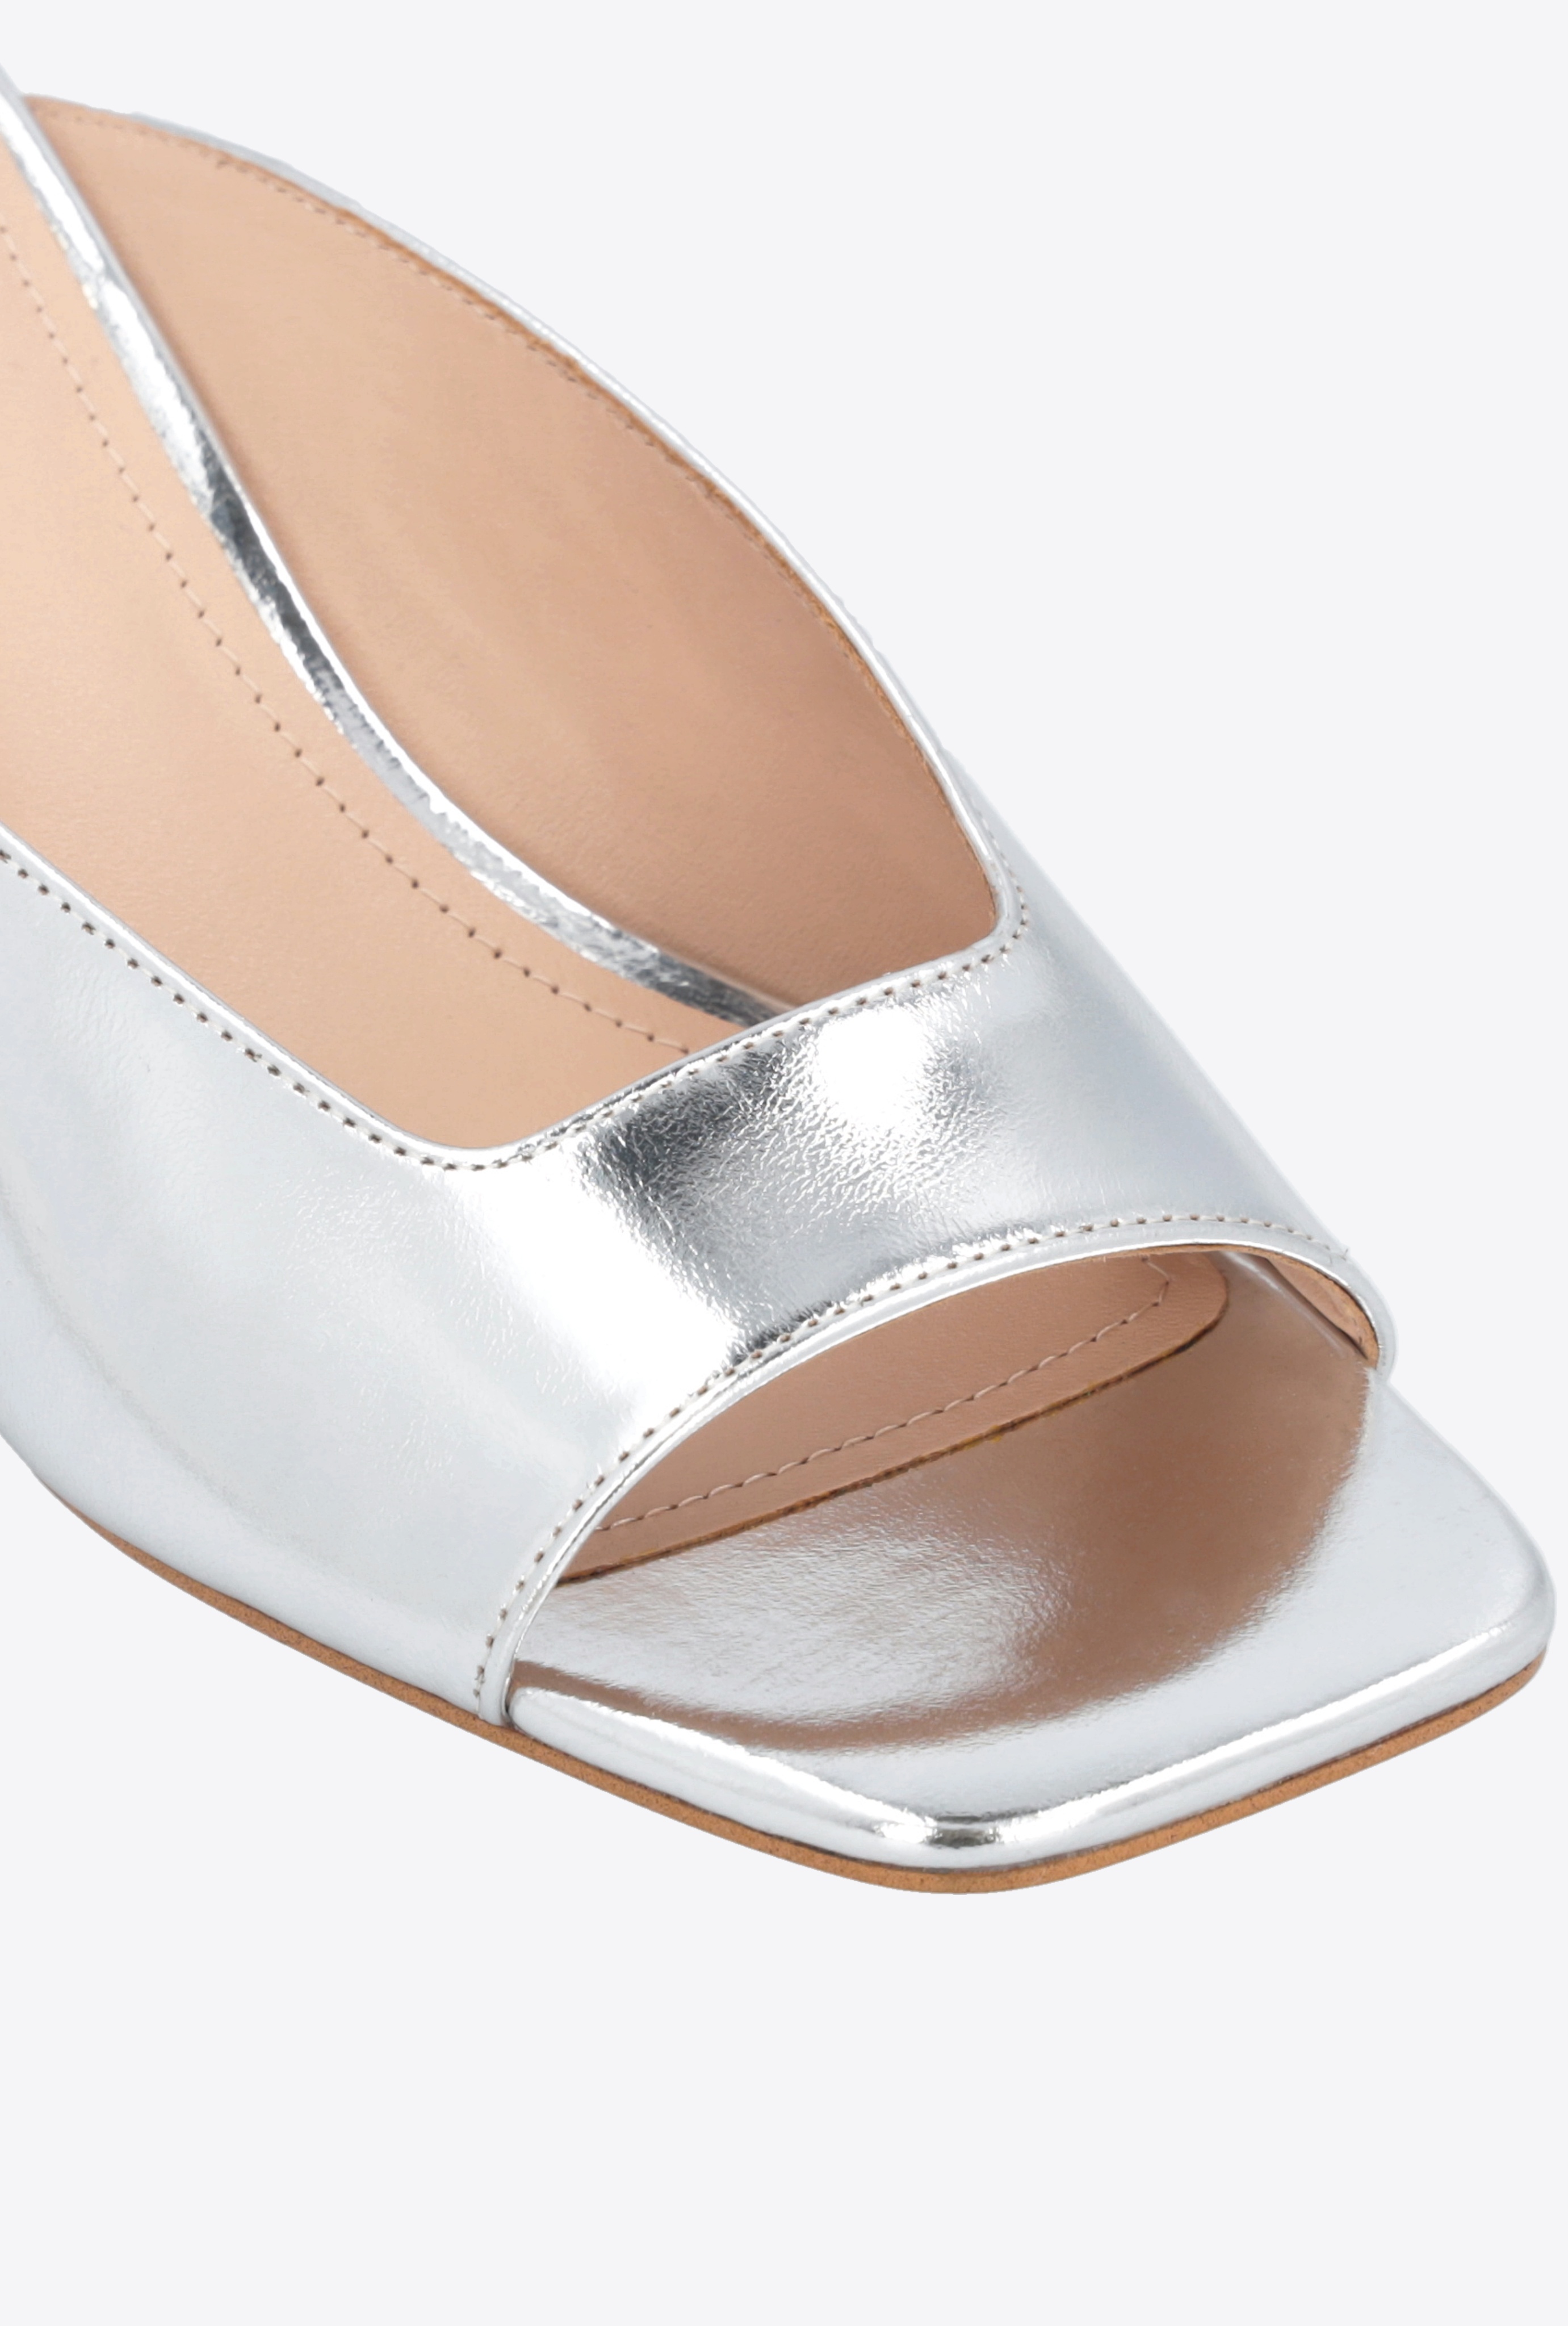 LAMINATED SLIP-ONS WITH SILVER HEEL - 4